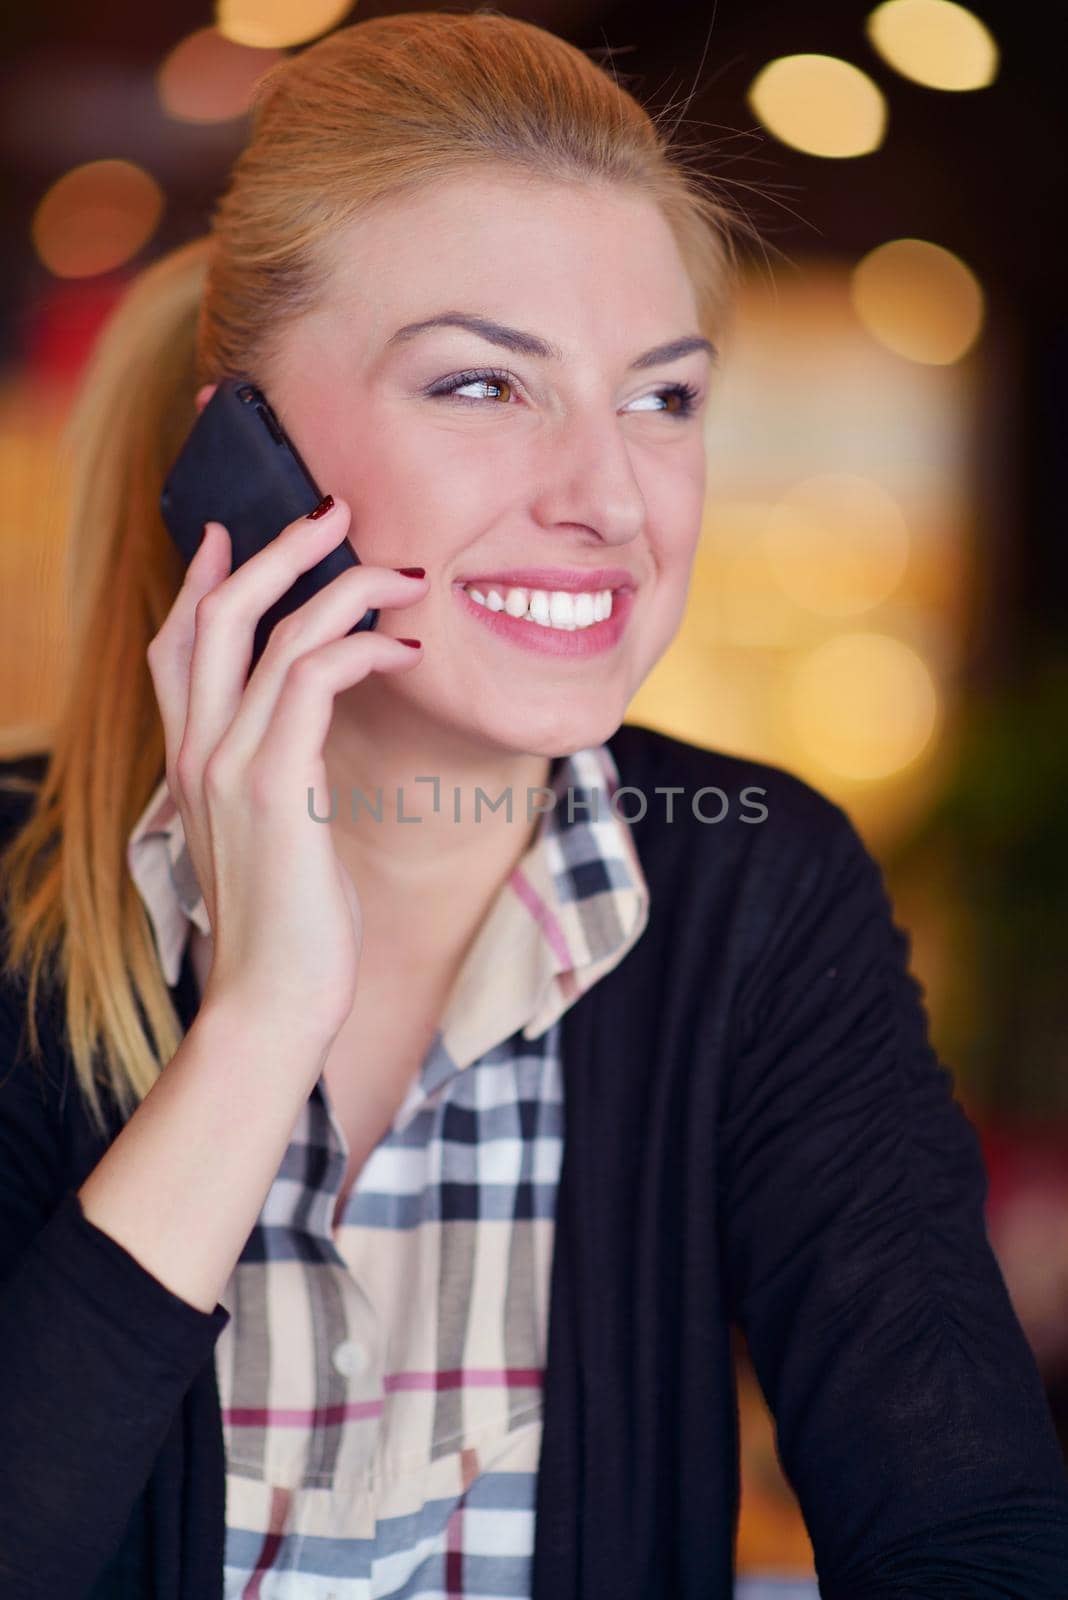 Portrait of a beautiful business woman talk by phone